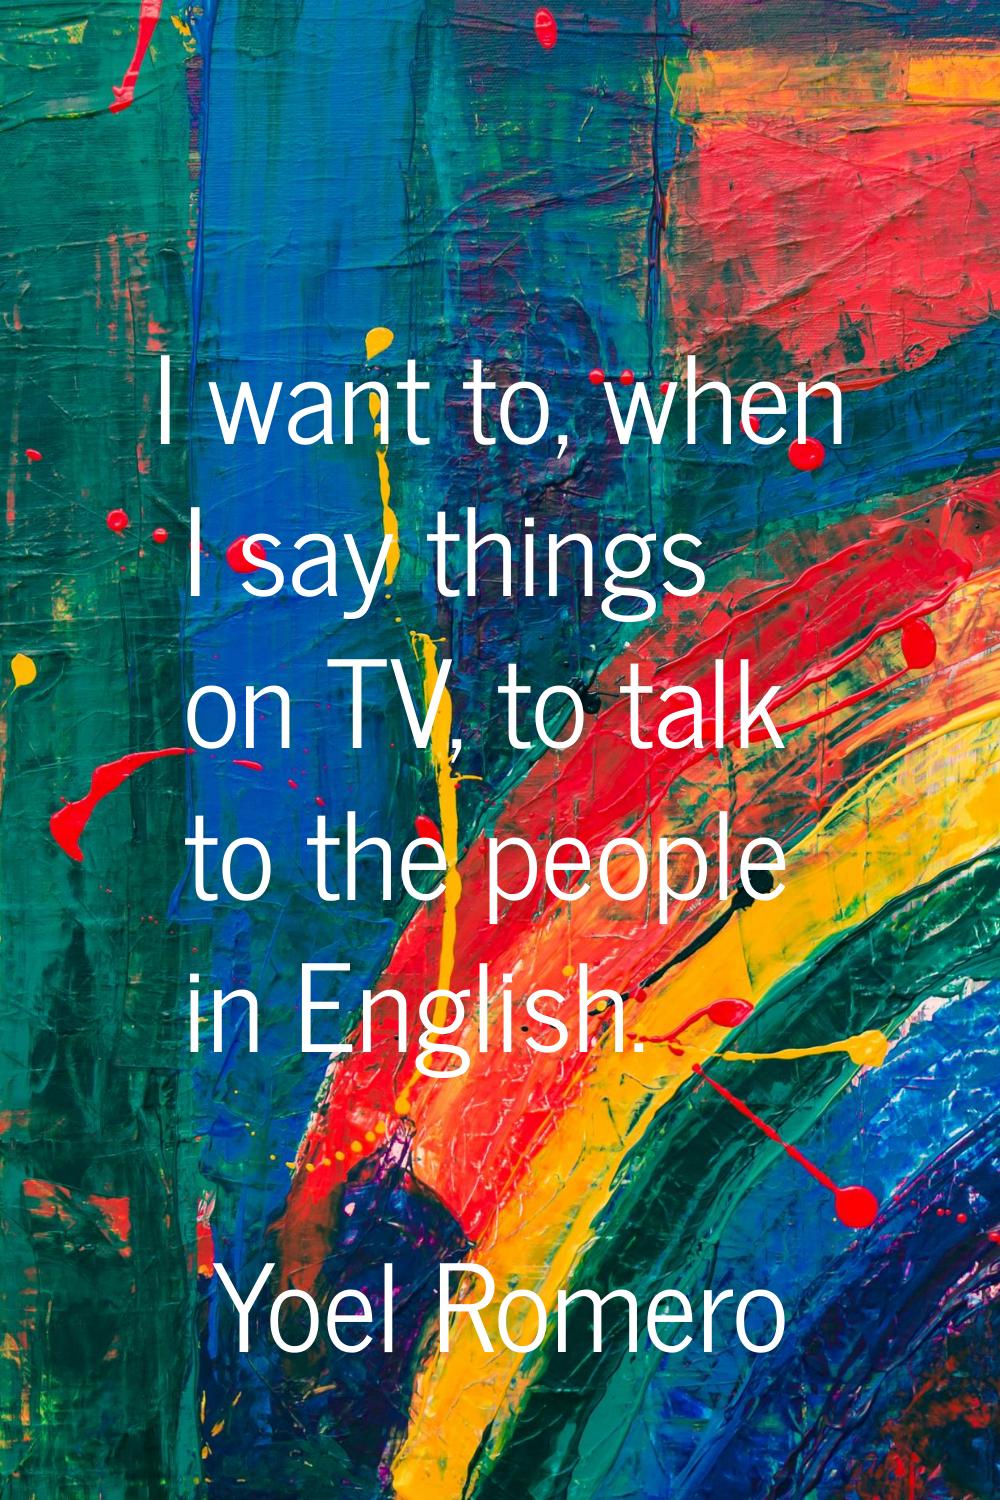 I want to, when I say things on TV, to talk to the people in English.